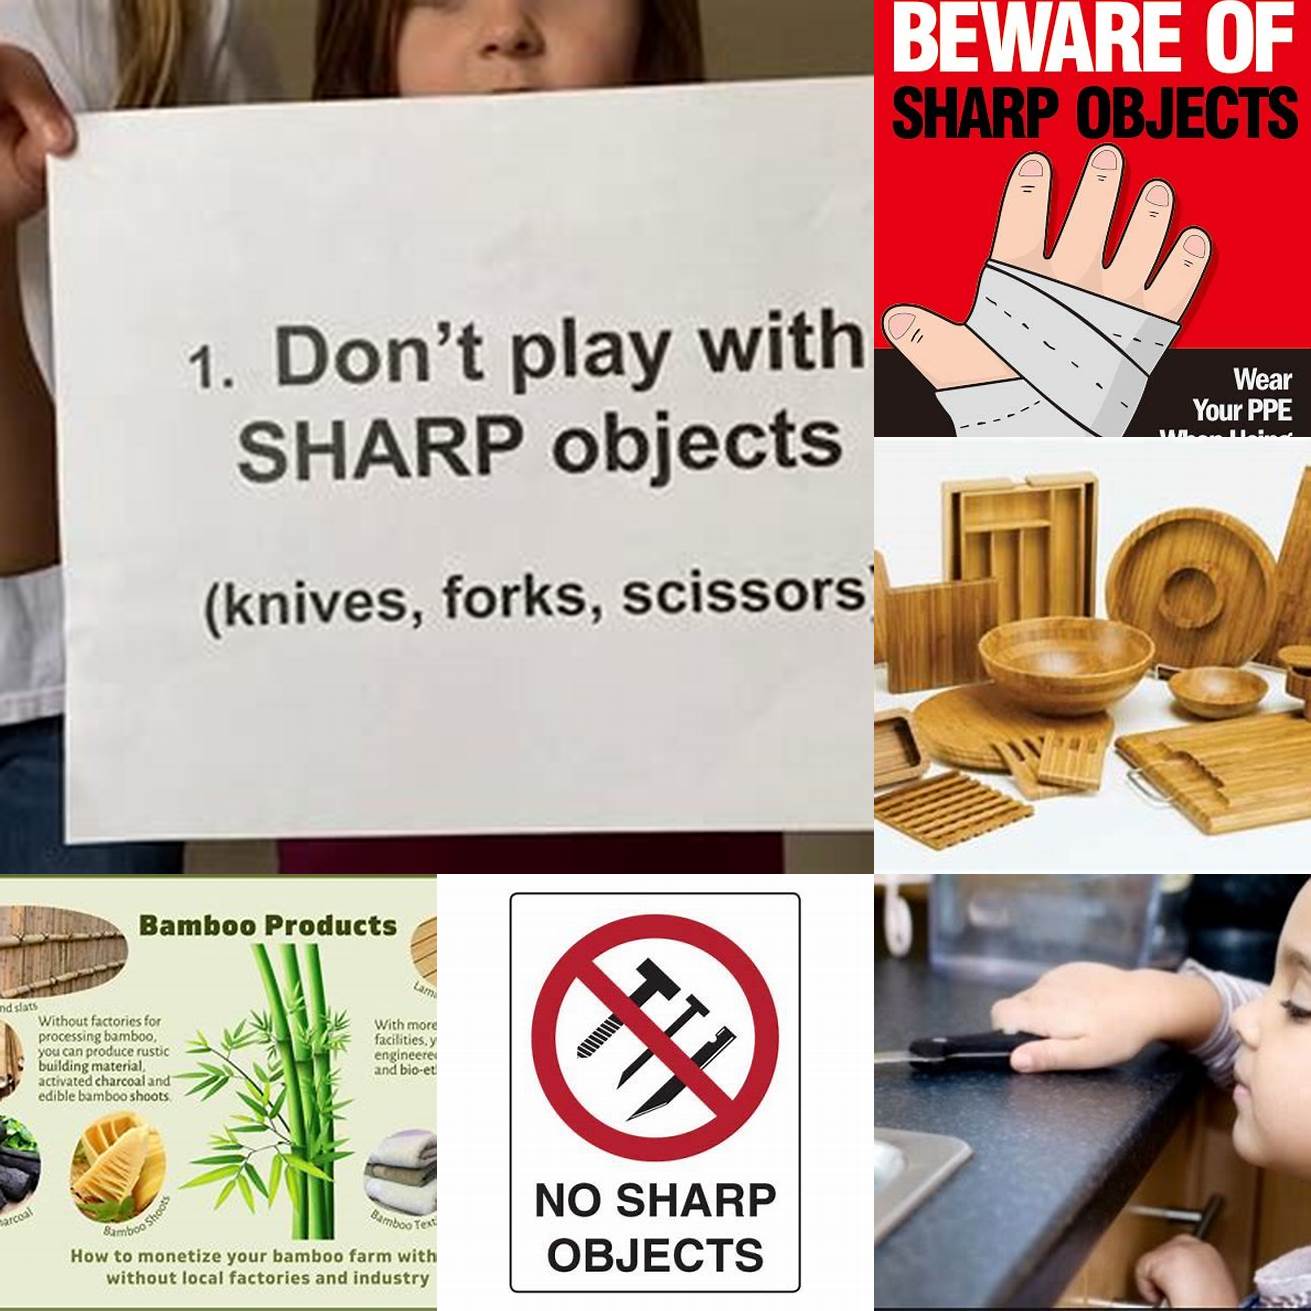 Avoid using sharp or heavy objects on bamboo products